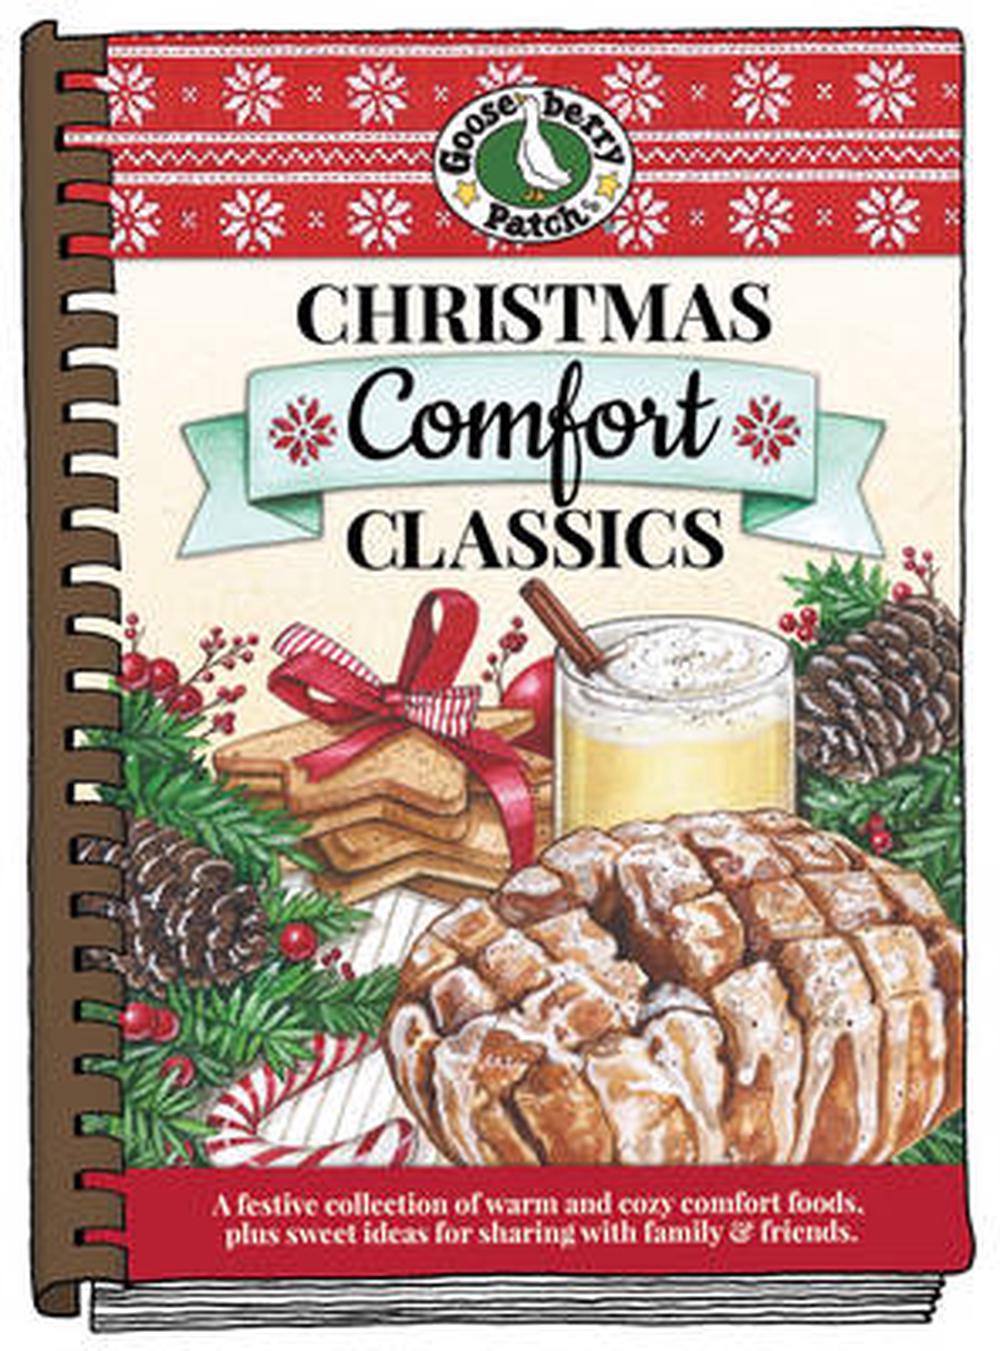 Christmas Comfort Classics Cookbook by Gooseberry Patch (English